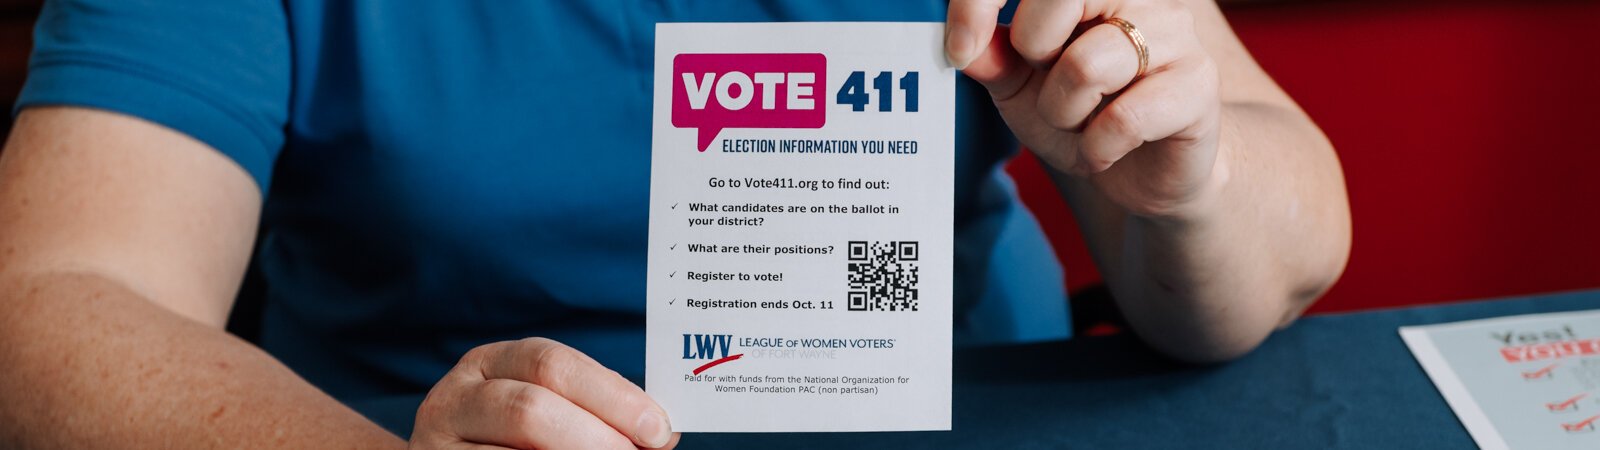 Why vote in the midterms, and who’s on the ballot? We highlight groups and resources in Allen County seeking to increase voter engagement and education.